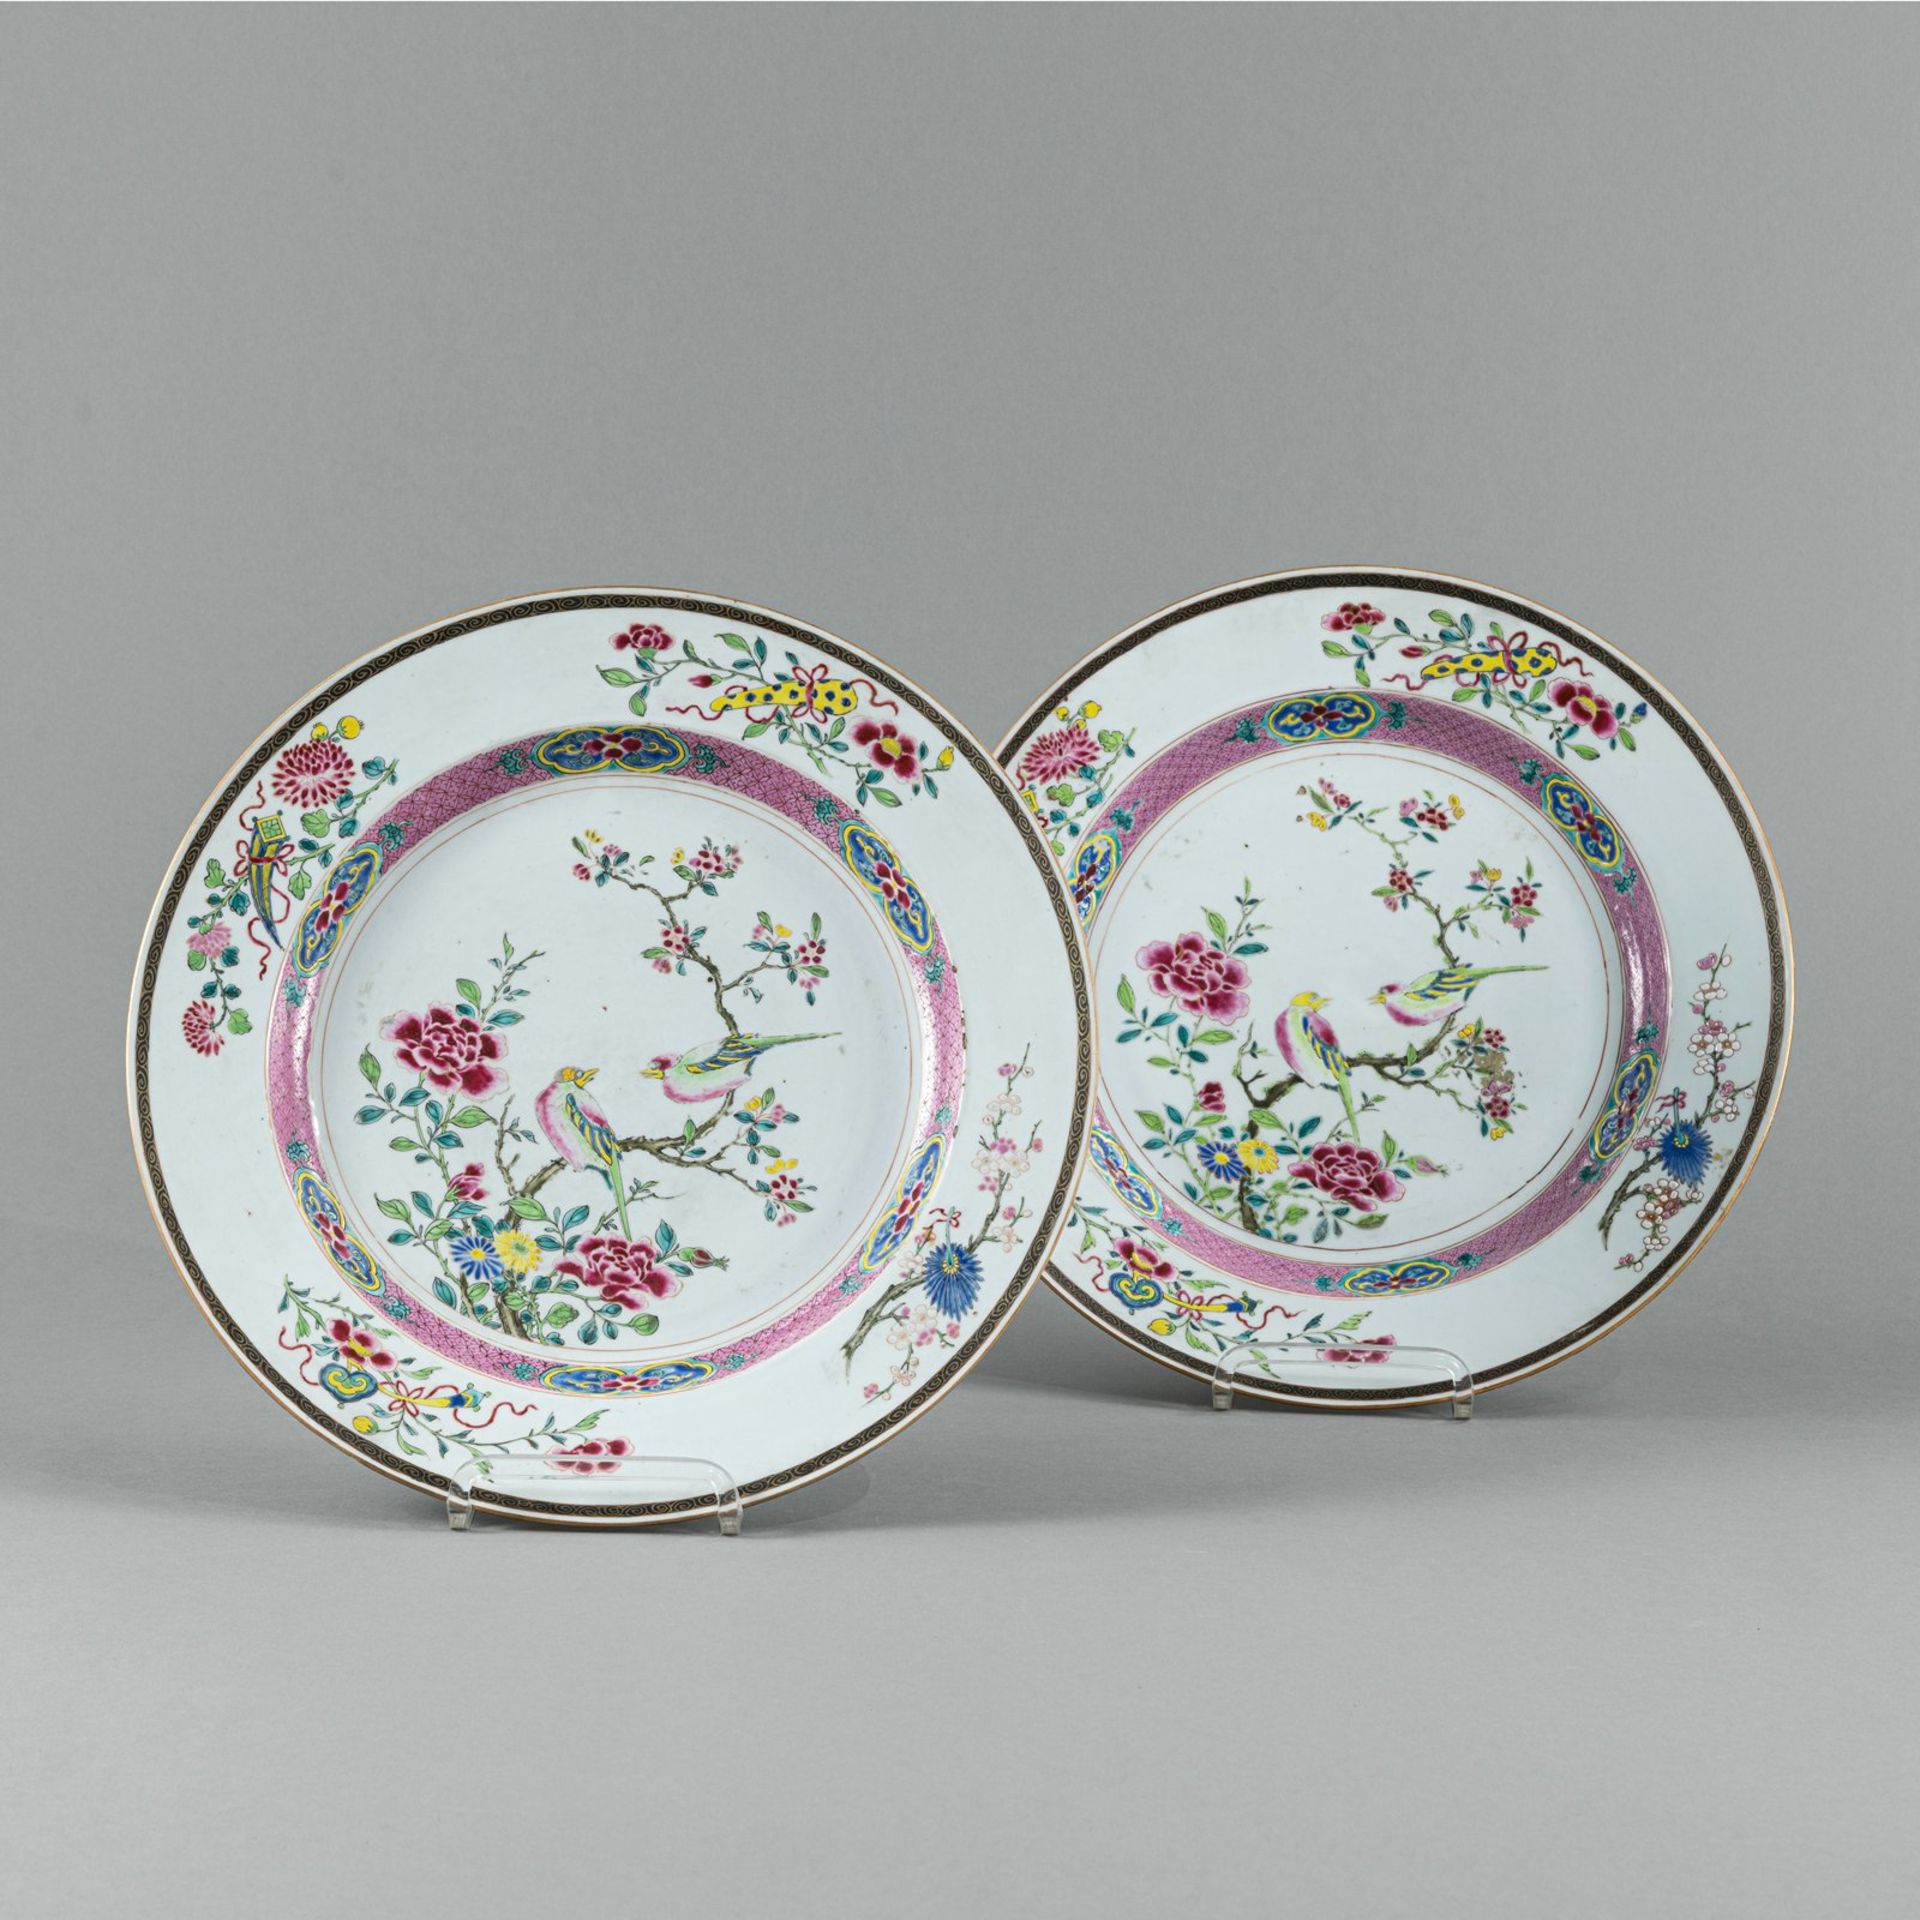 A PAIR OF ' FAMILLE -ROSE' BIRDS AND FLOWERS CHARGERS